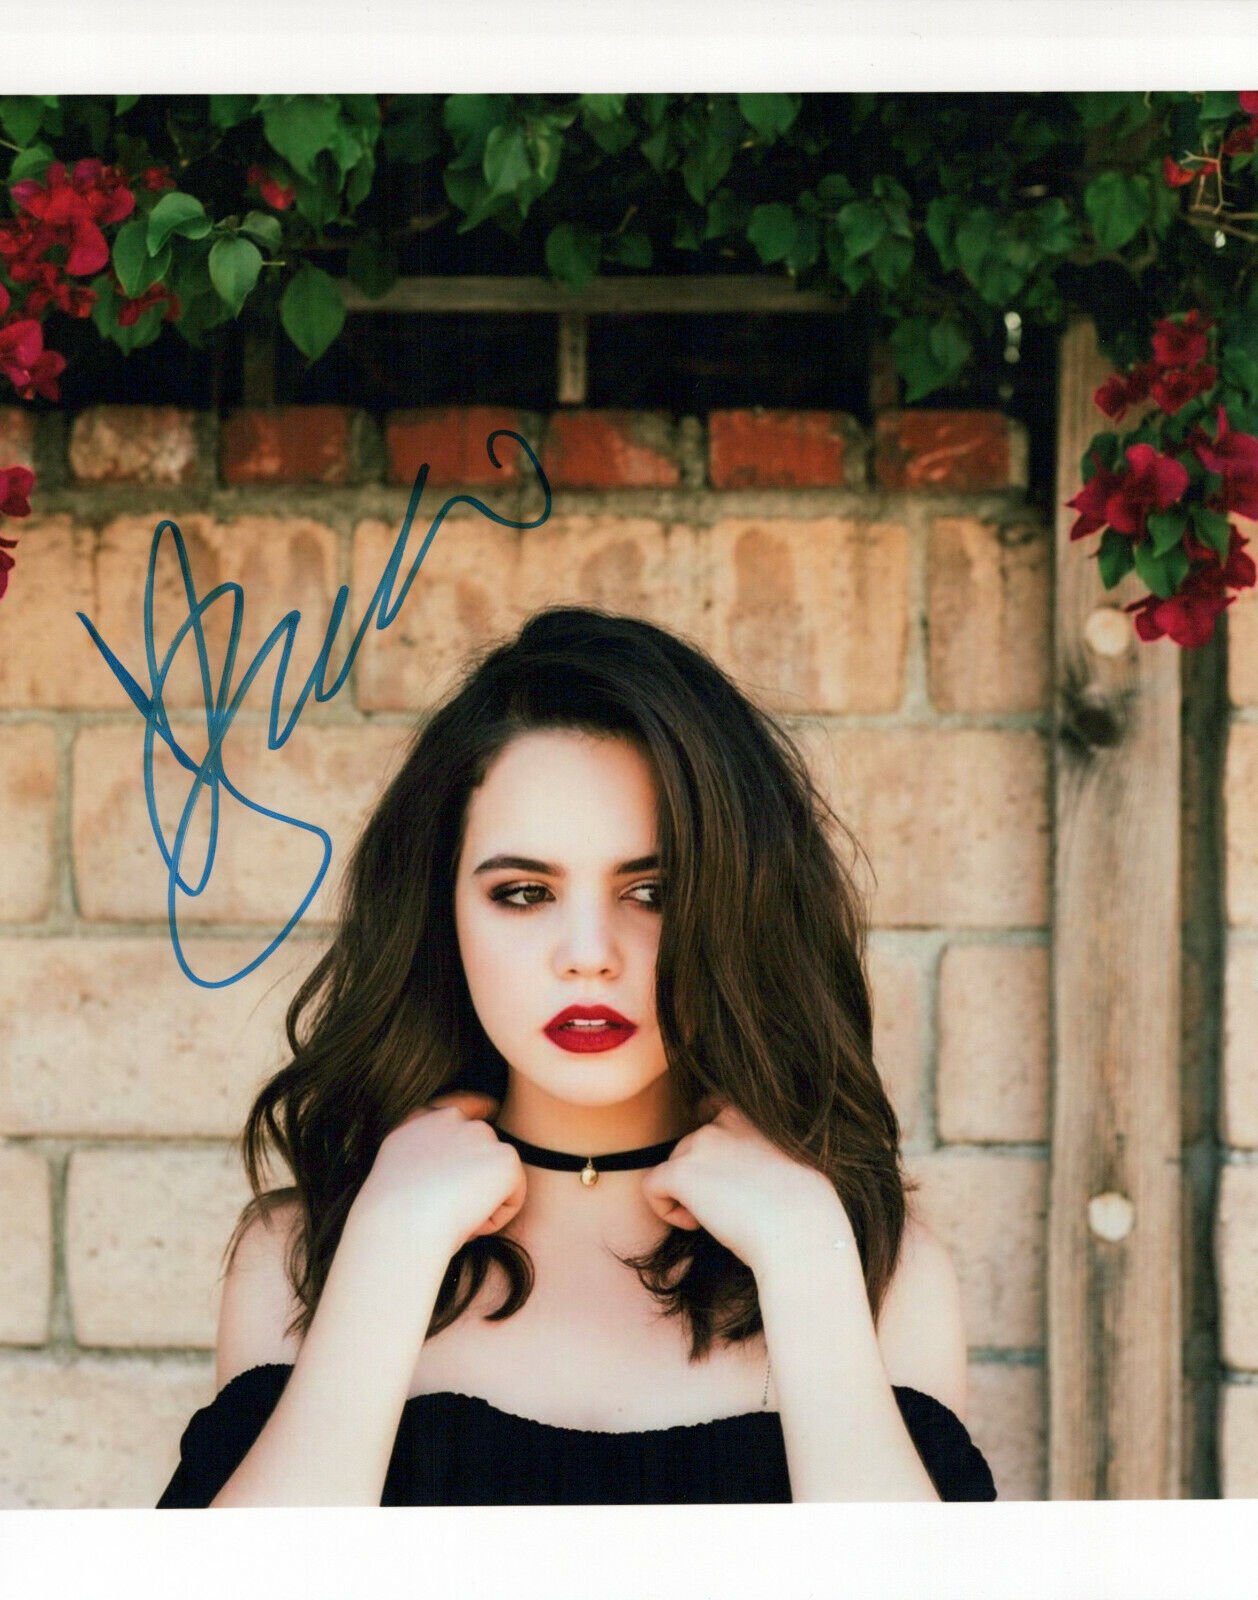 Bailee Madison glamour shot autographed Photo Poster painting signed 8x10 #1